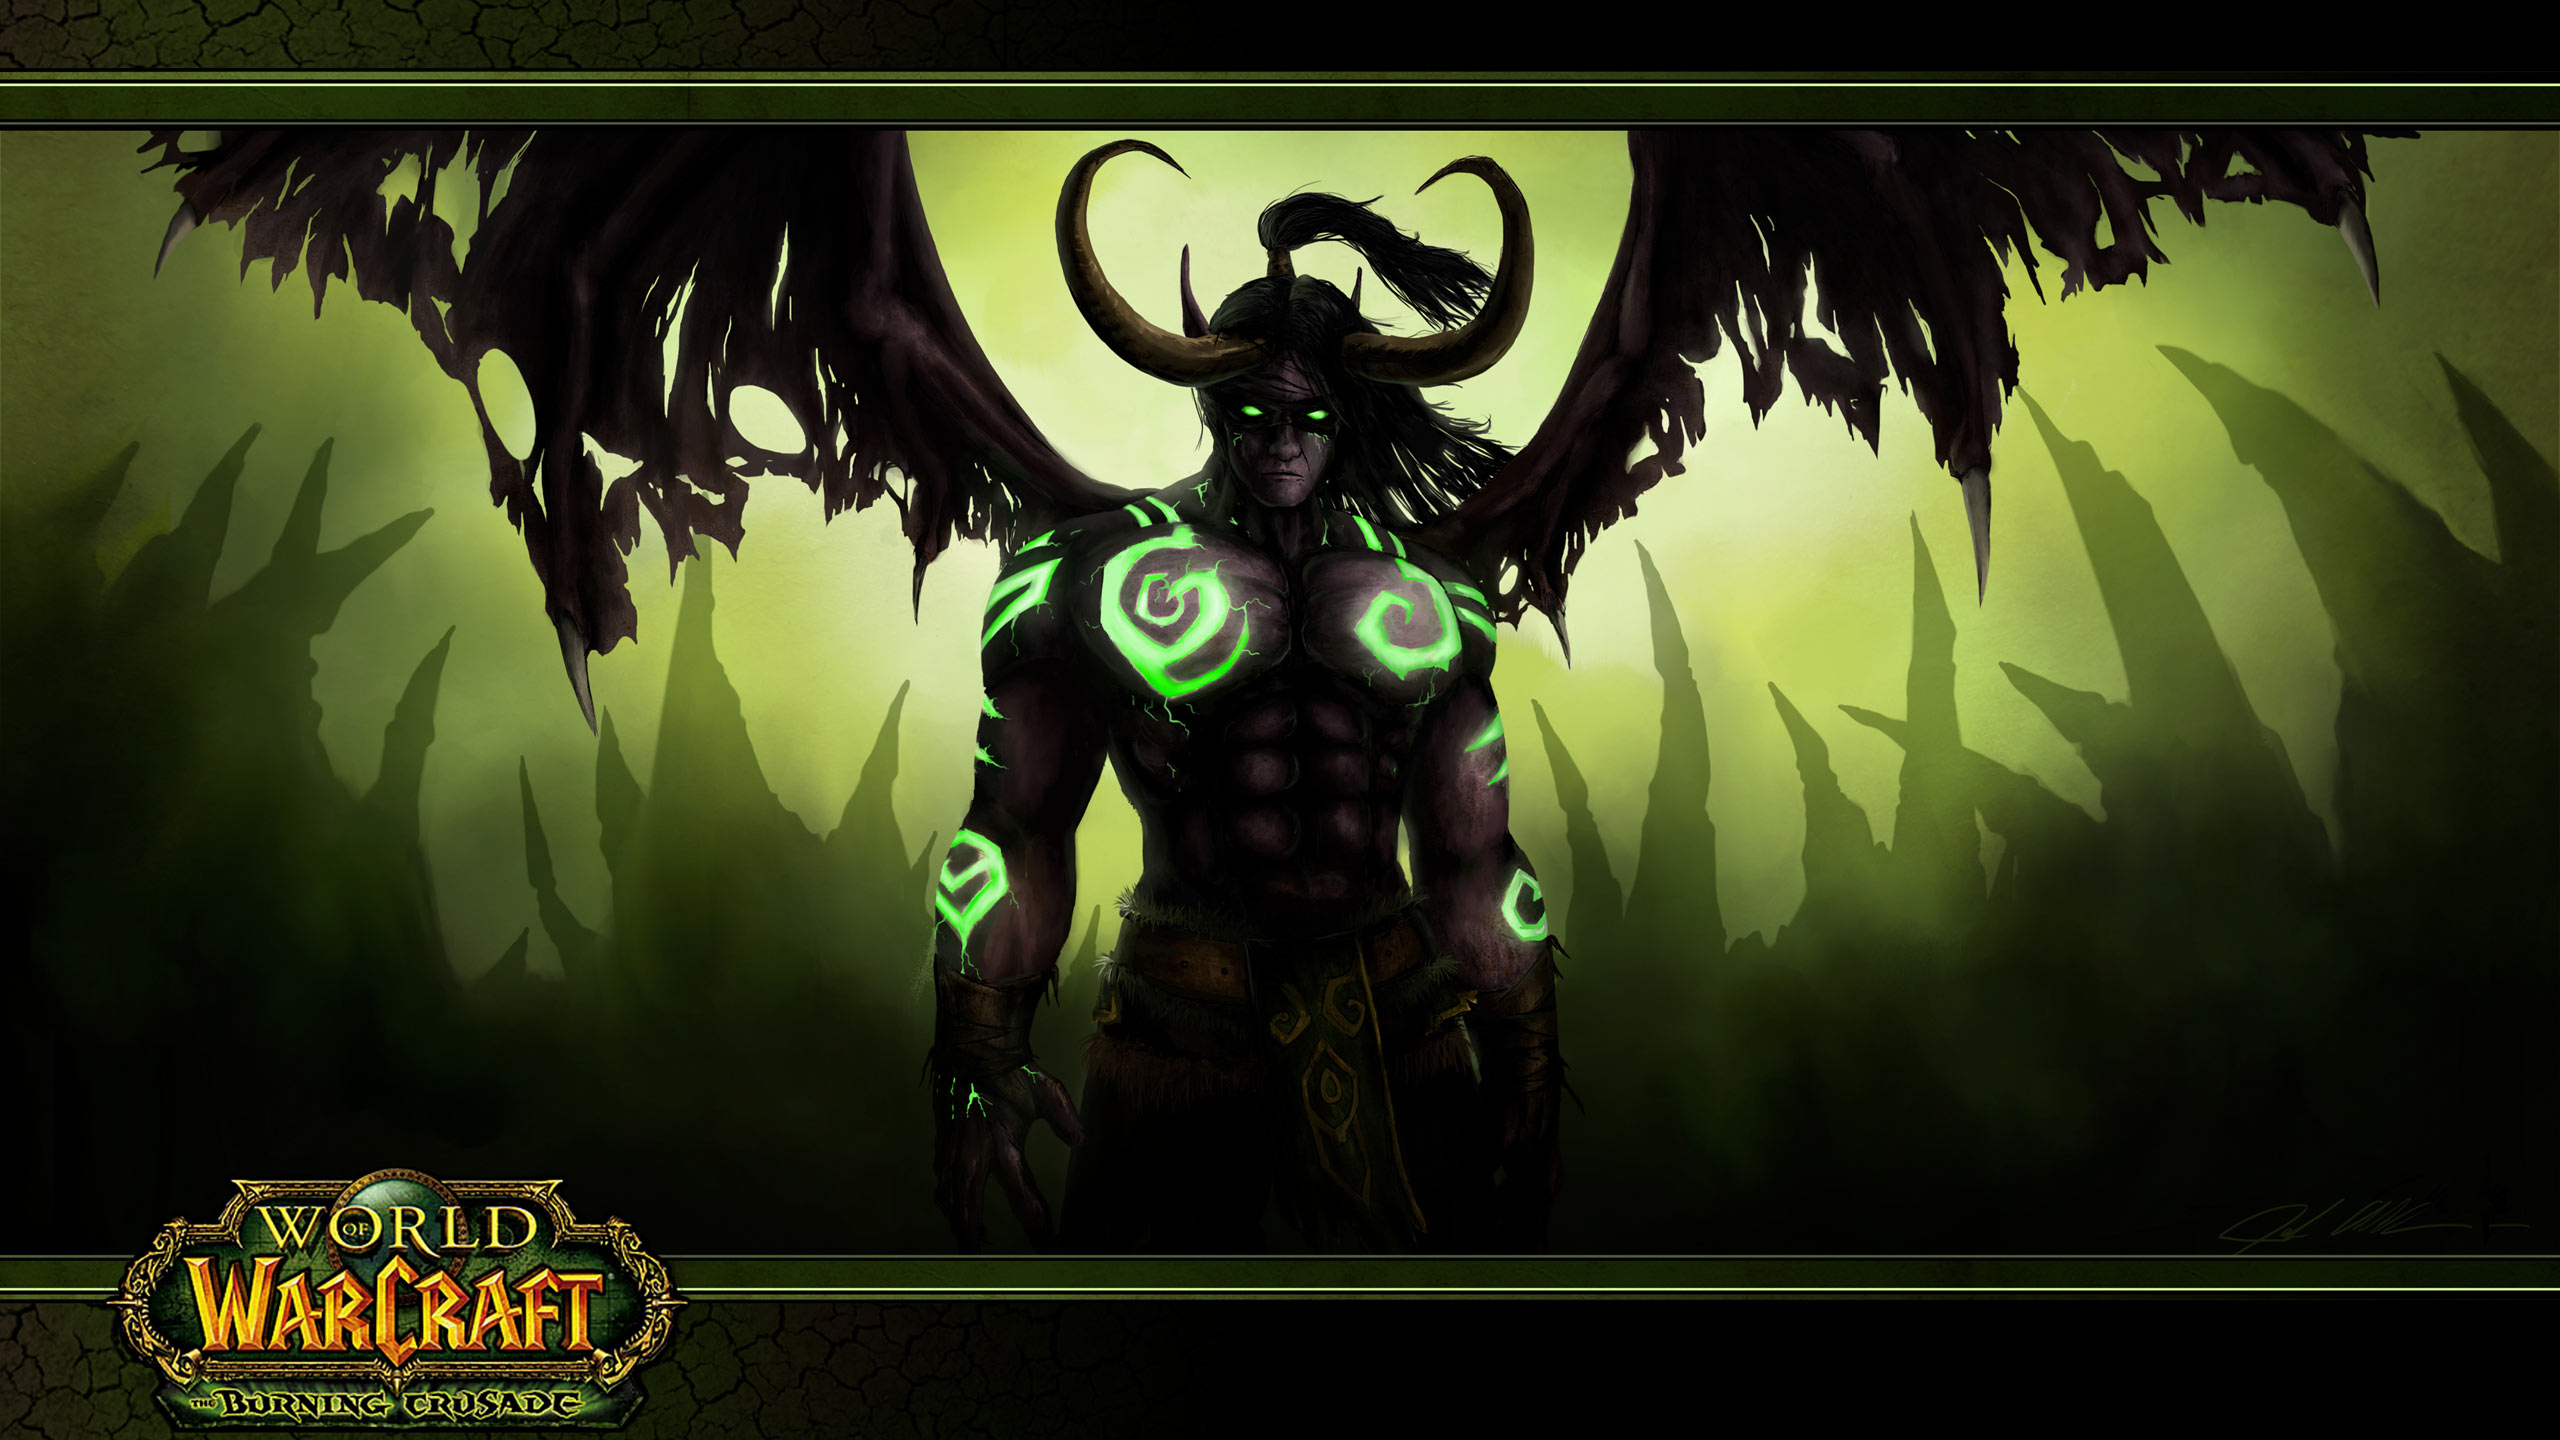 World Of Warcraft: The Burning Crusade Backgrounds, Compatible - PC, Mobile, Gadgets| 2560x1440 px